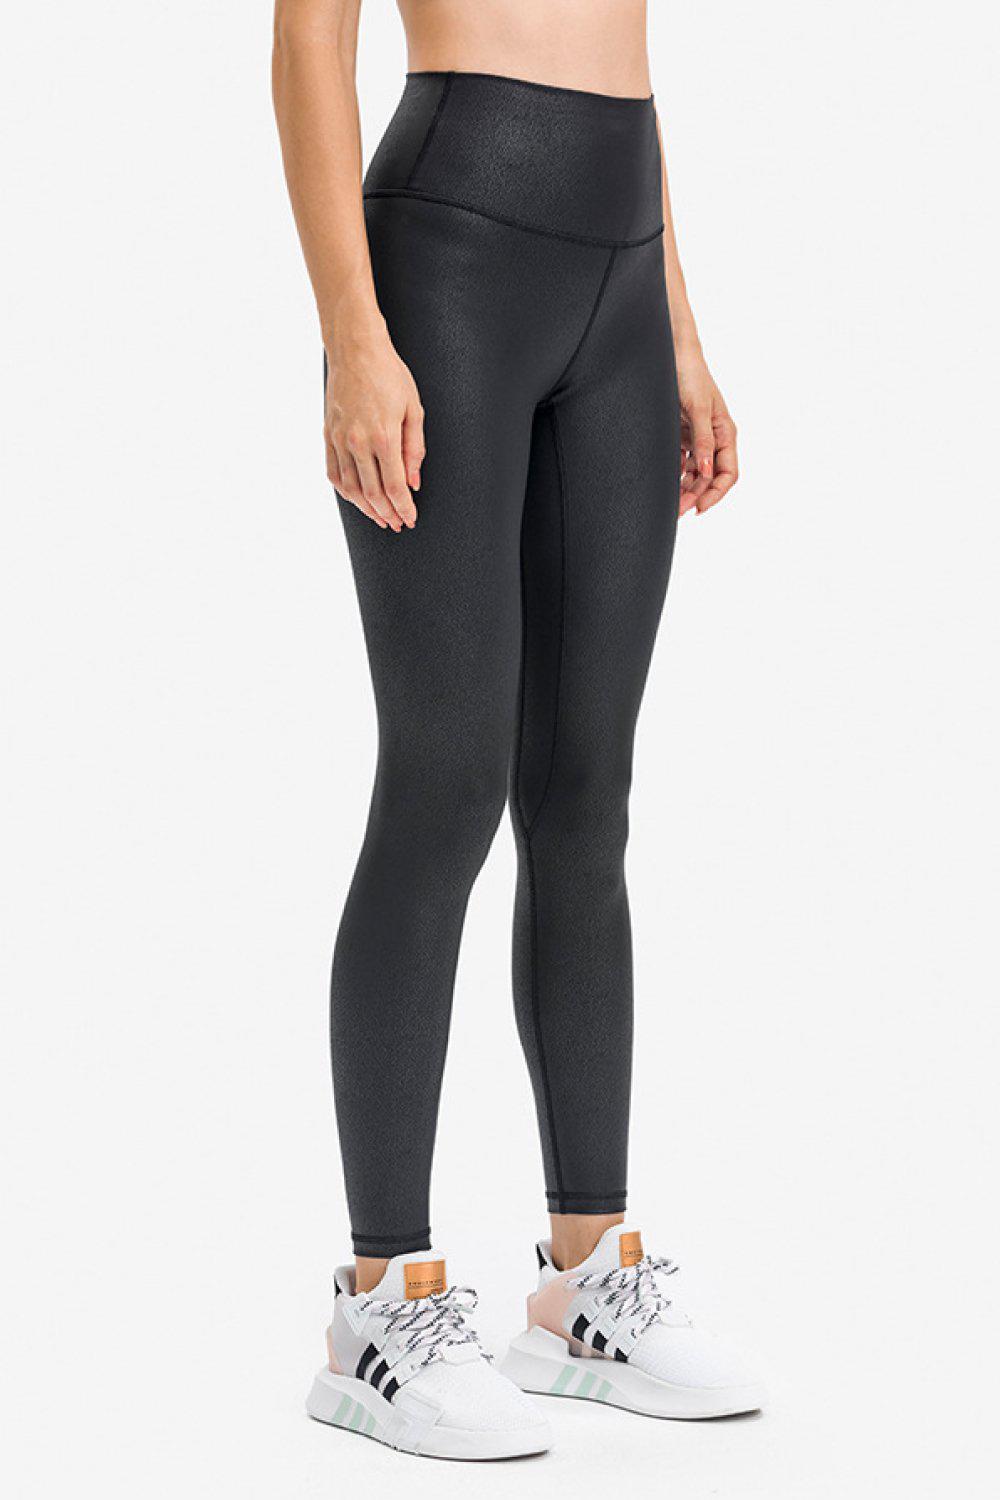 Invisible Pocket Sports Leggings BLUE ZONE PLANET